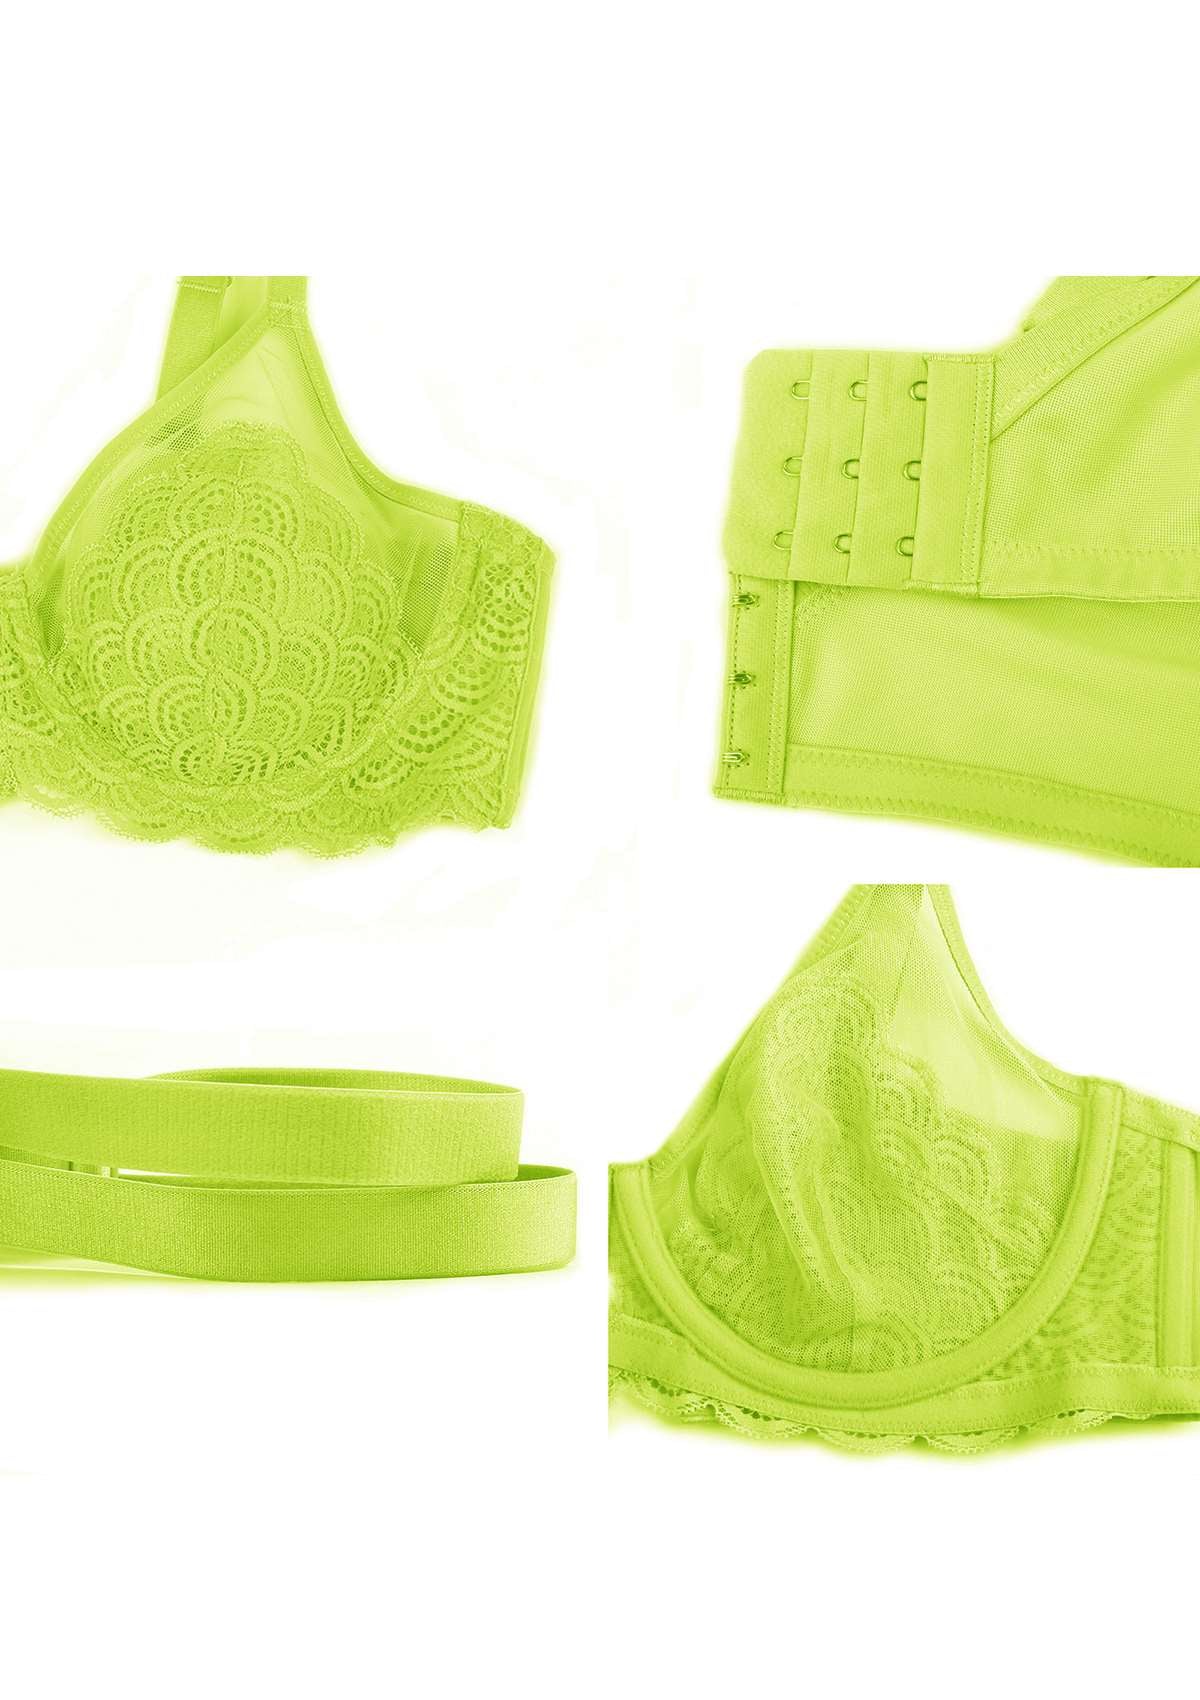 HSIA Mermaid Scales Sheer Lace Bra: Unlined Full Coverage Wired Bra - Lime Green / 34 / C